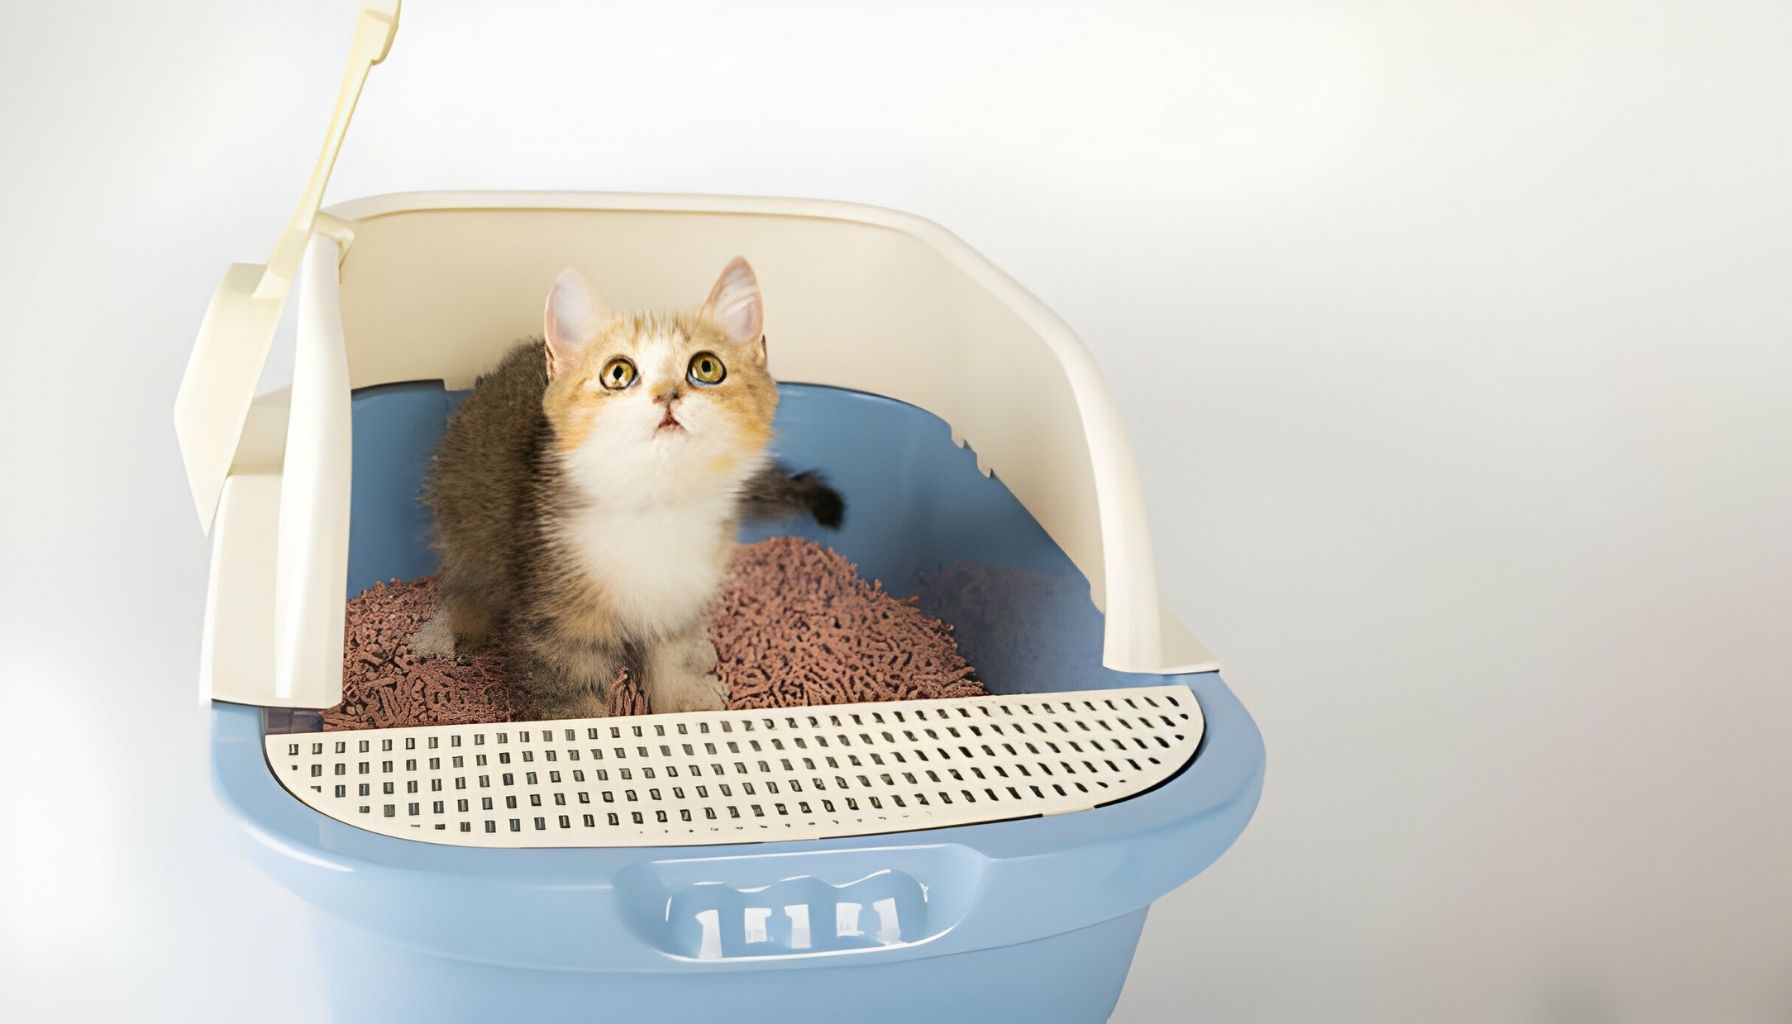 Can I Change the Location of My Cat's Litter Box